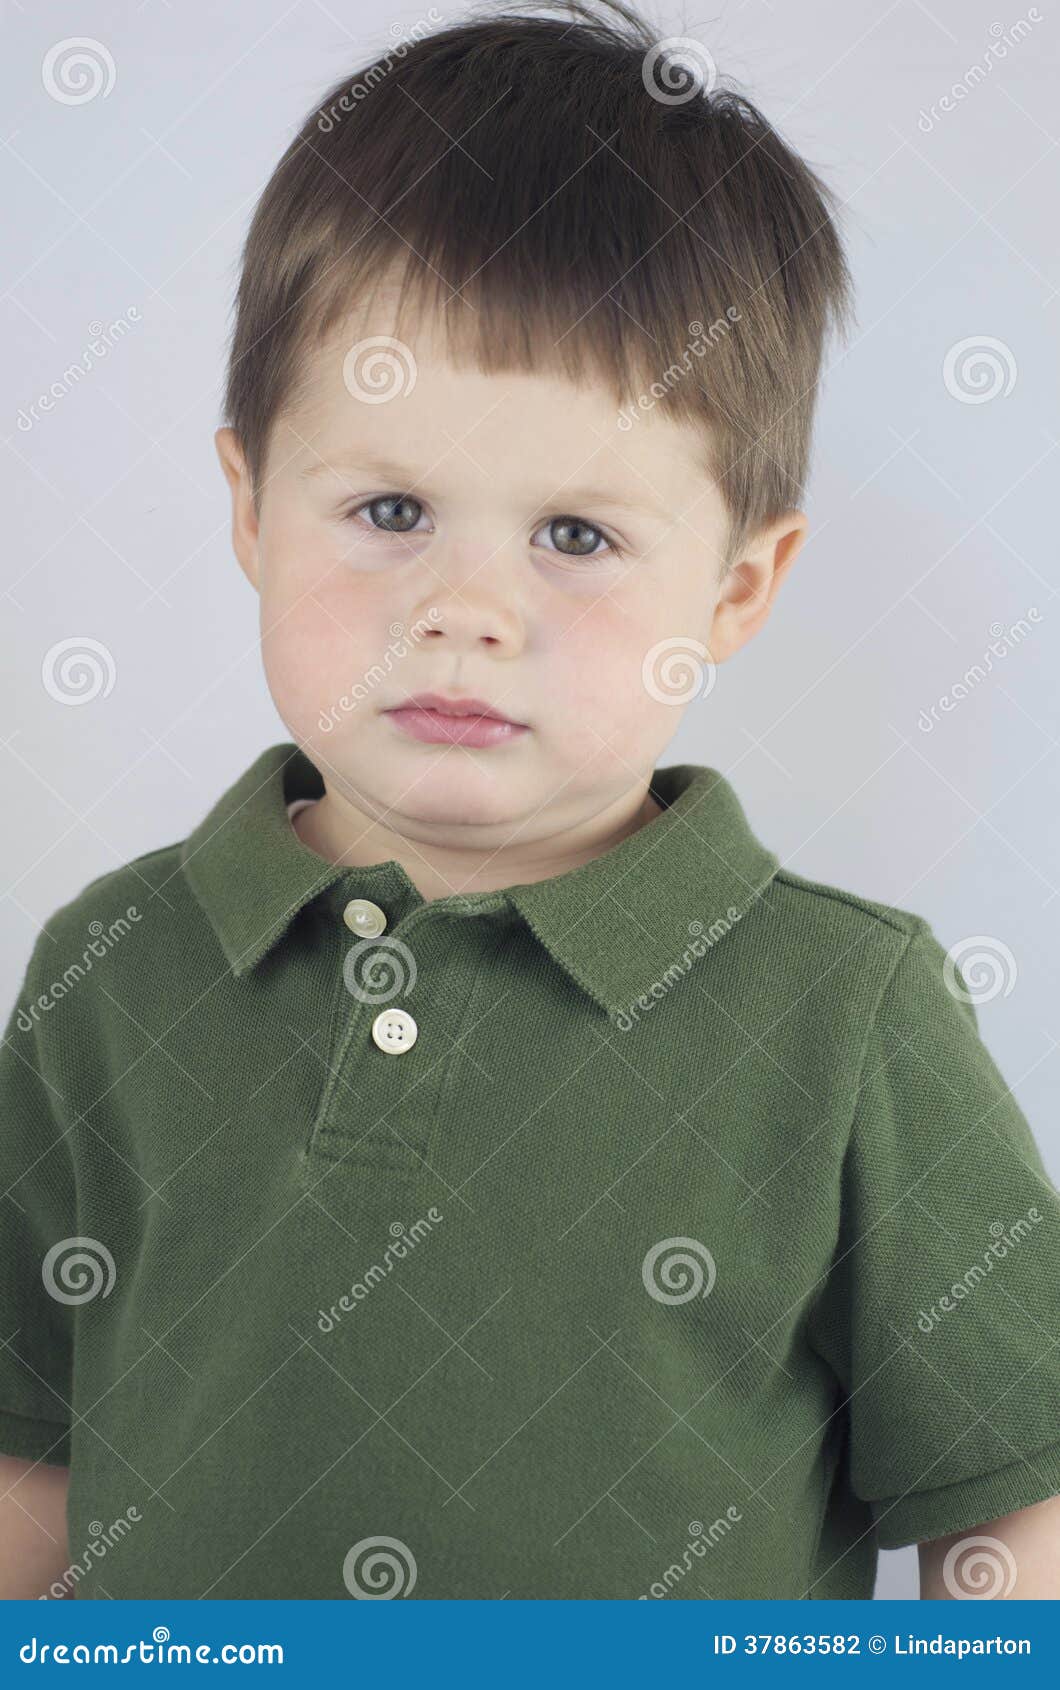 Sad Faced Little Boy stock photo. Image of small, green - 37863582